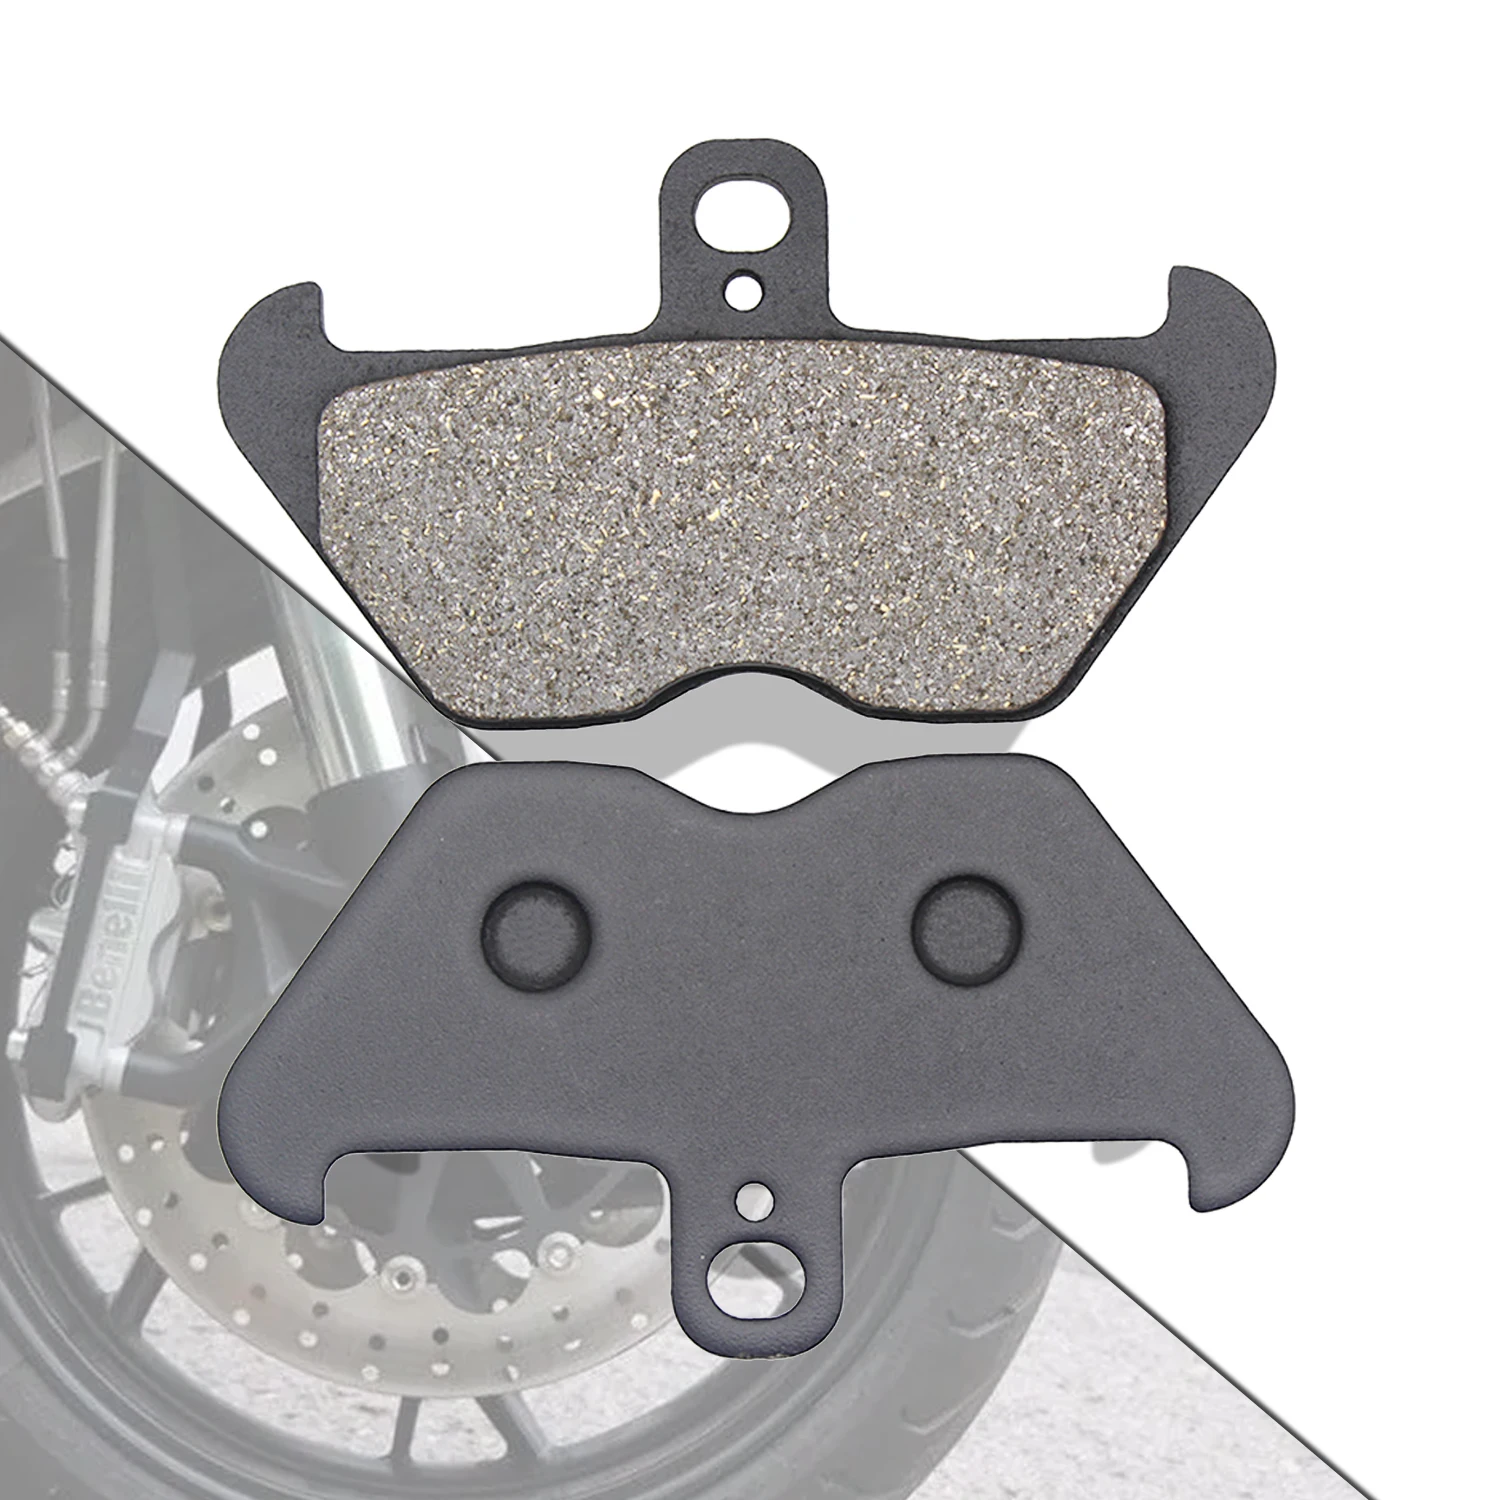 

Motorcycle Front Brake Pads For BMW R850C R850GS R850R R850RT R100 Mystic R100R R1100GS R1100R R1100RS R1100RT R1100S R1150GS